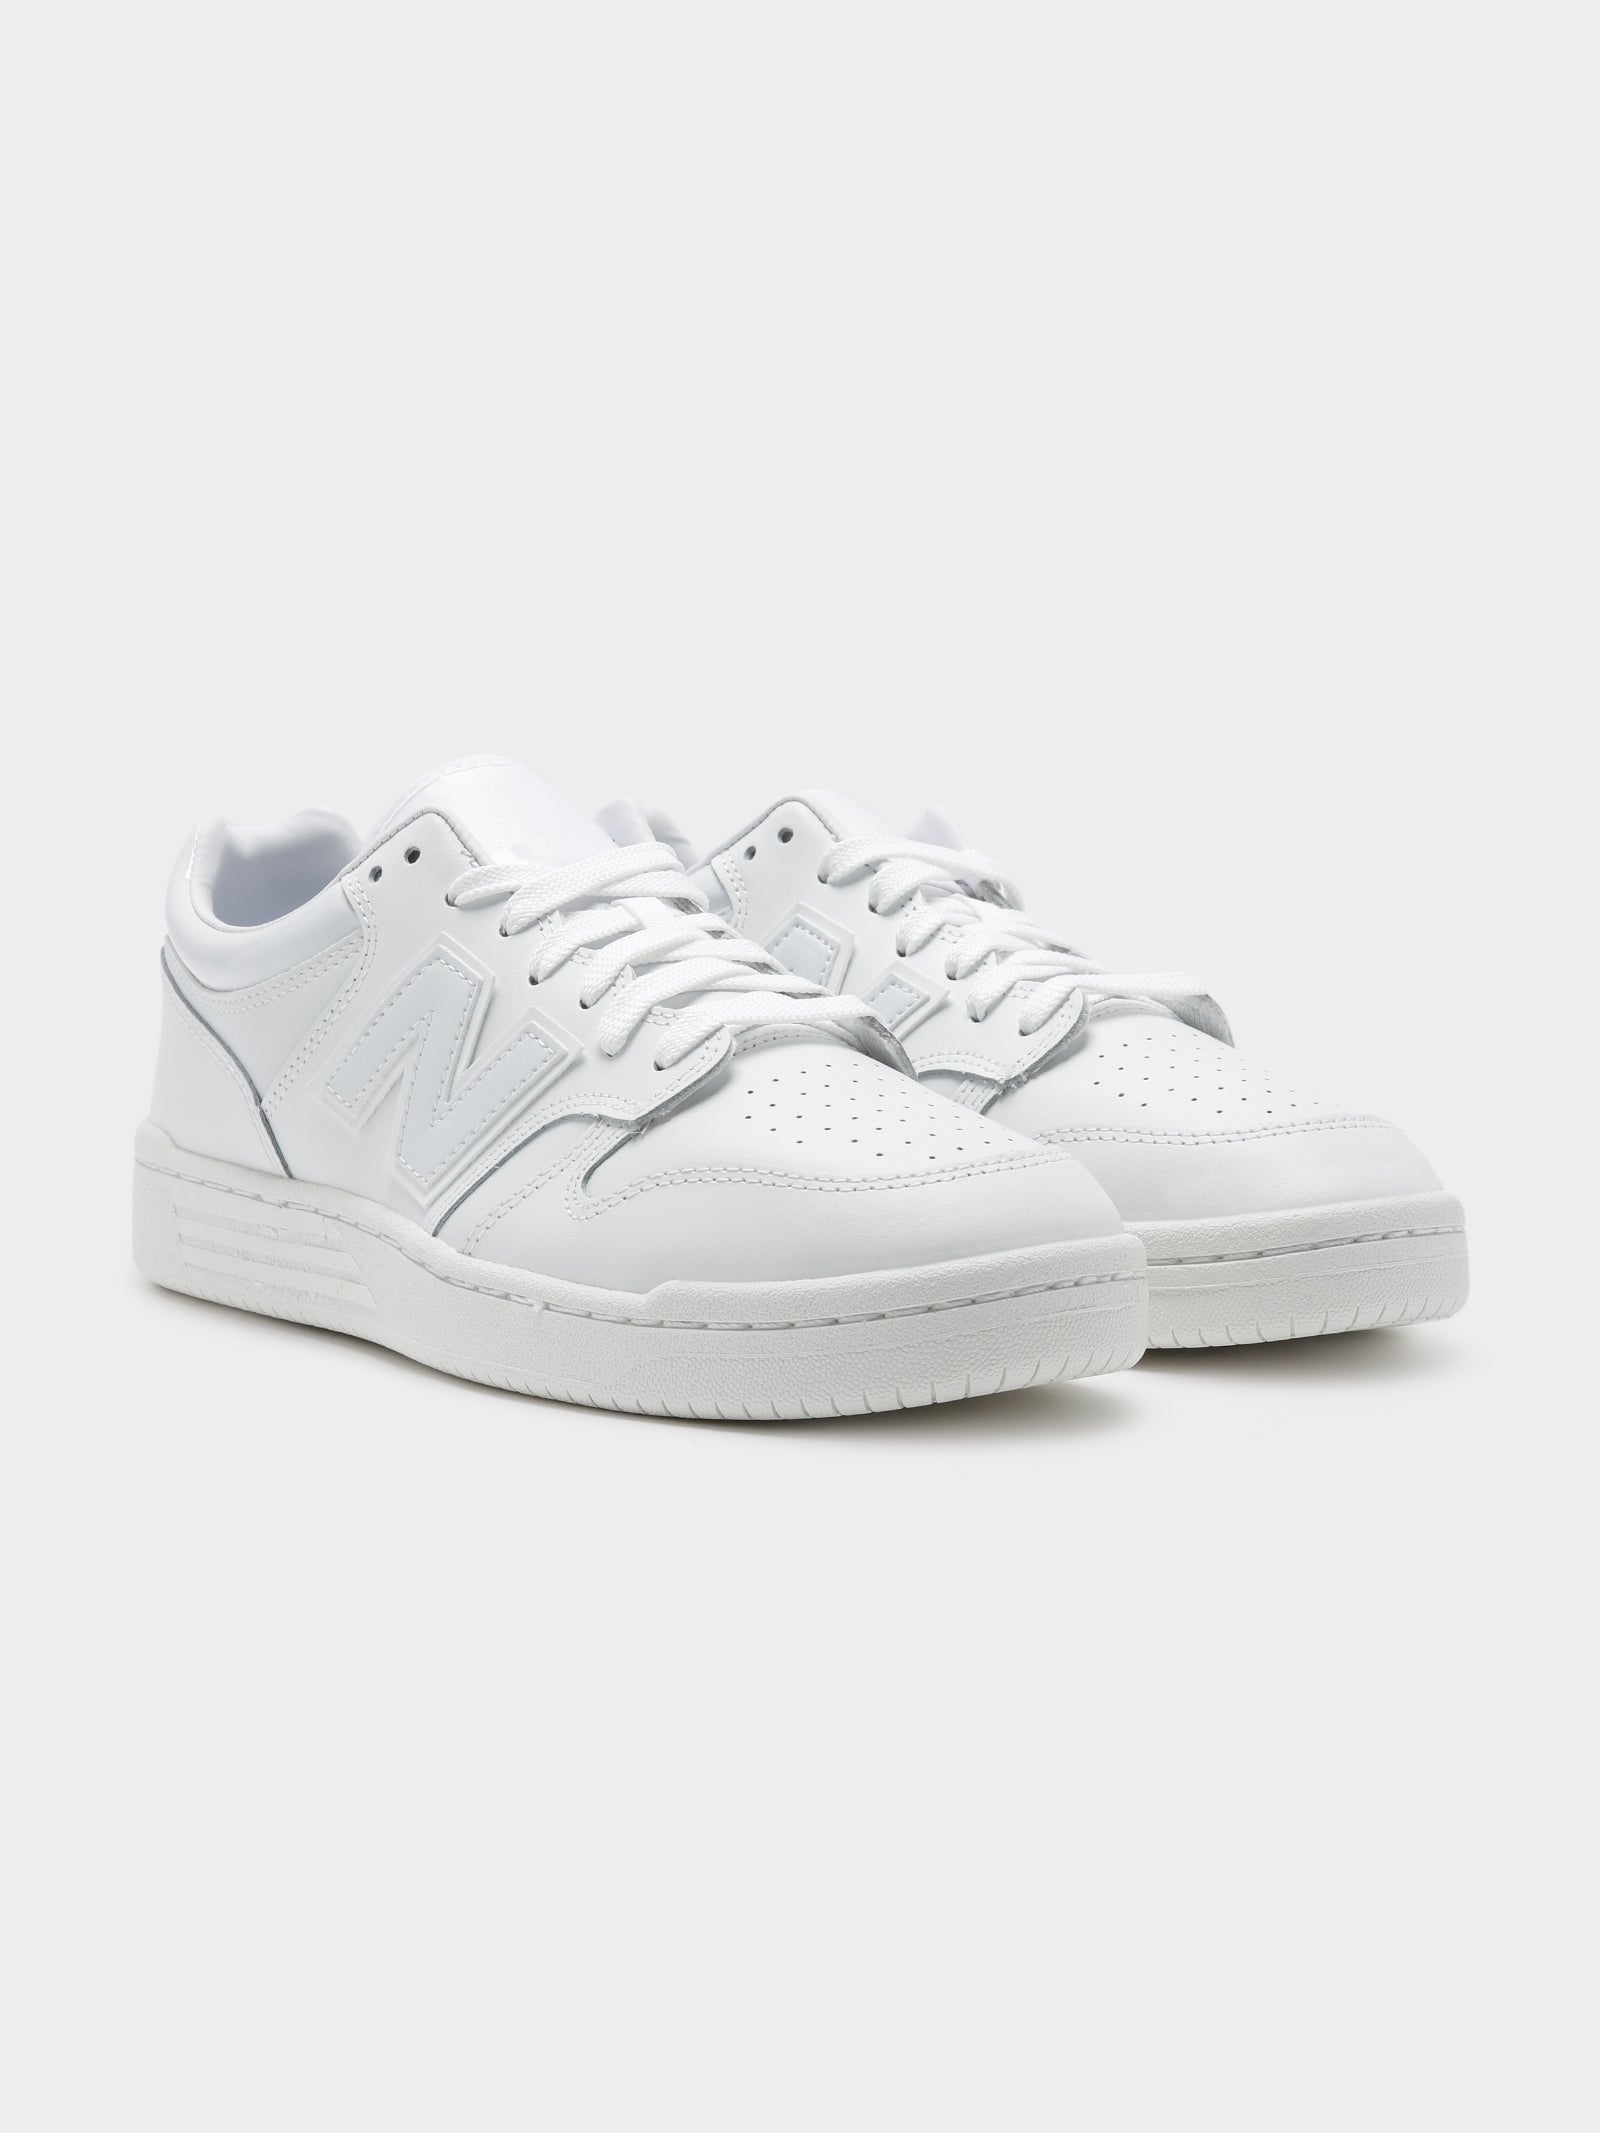 Unisex BB 480 Sneakers in White